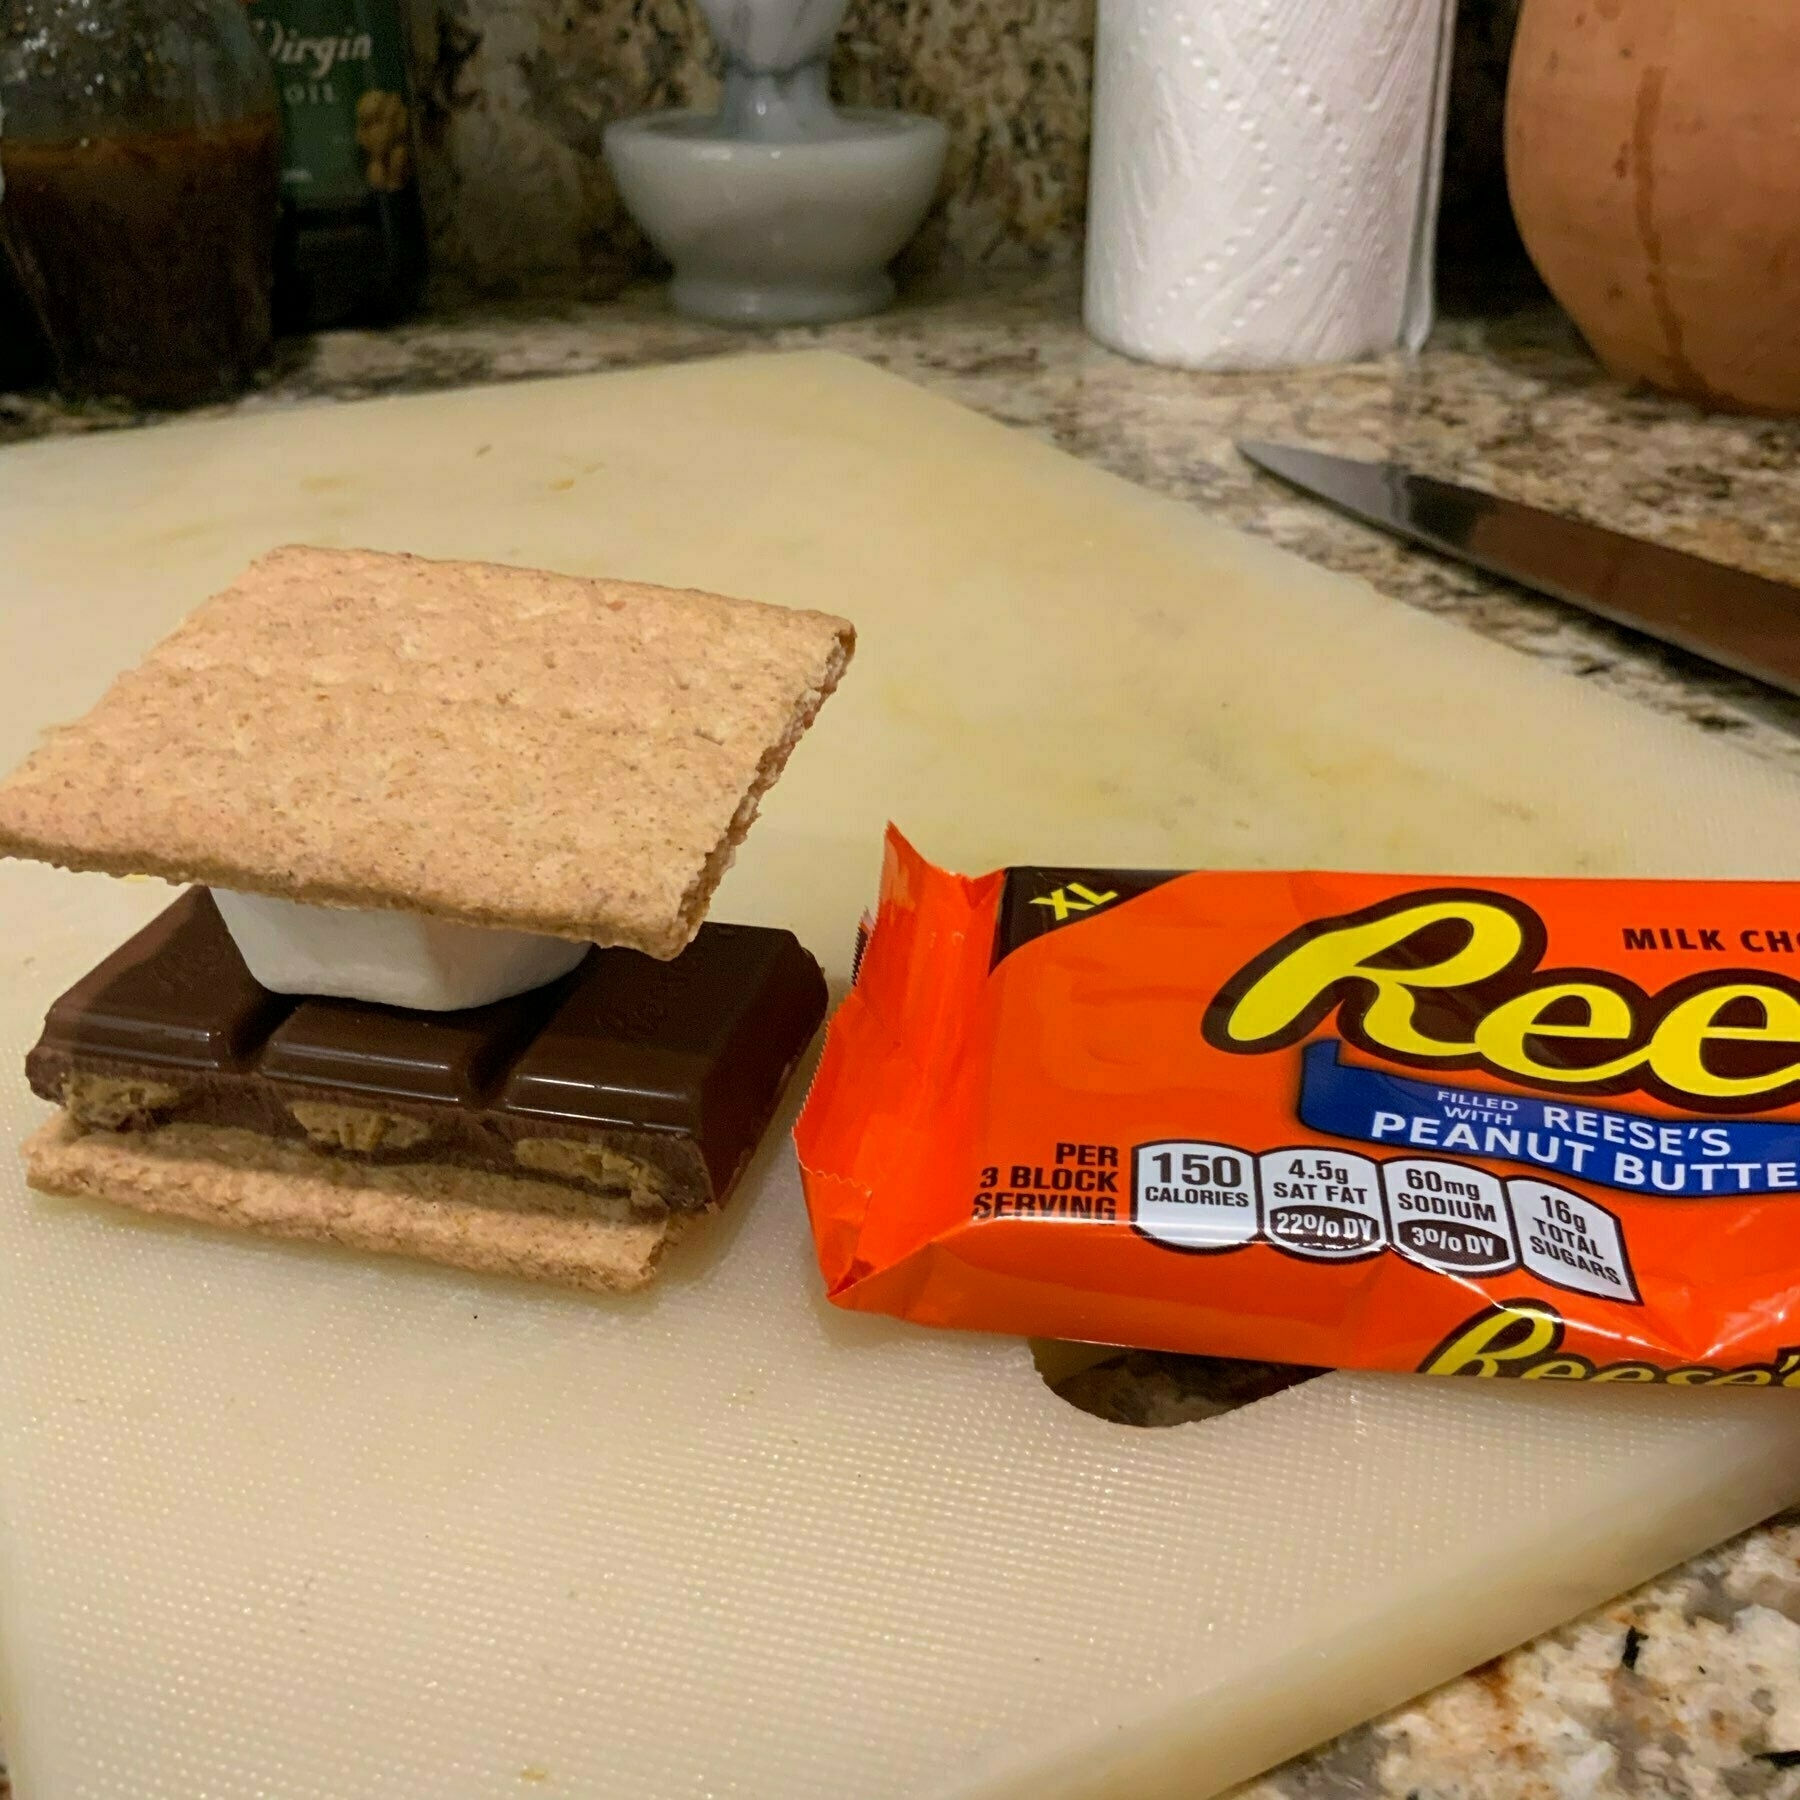 Reese's s'more "dry fit"